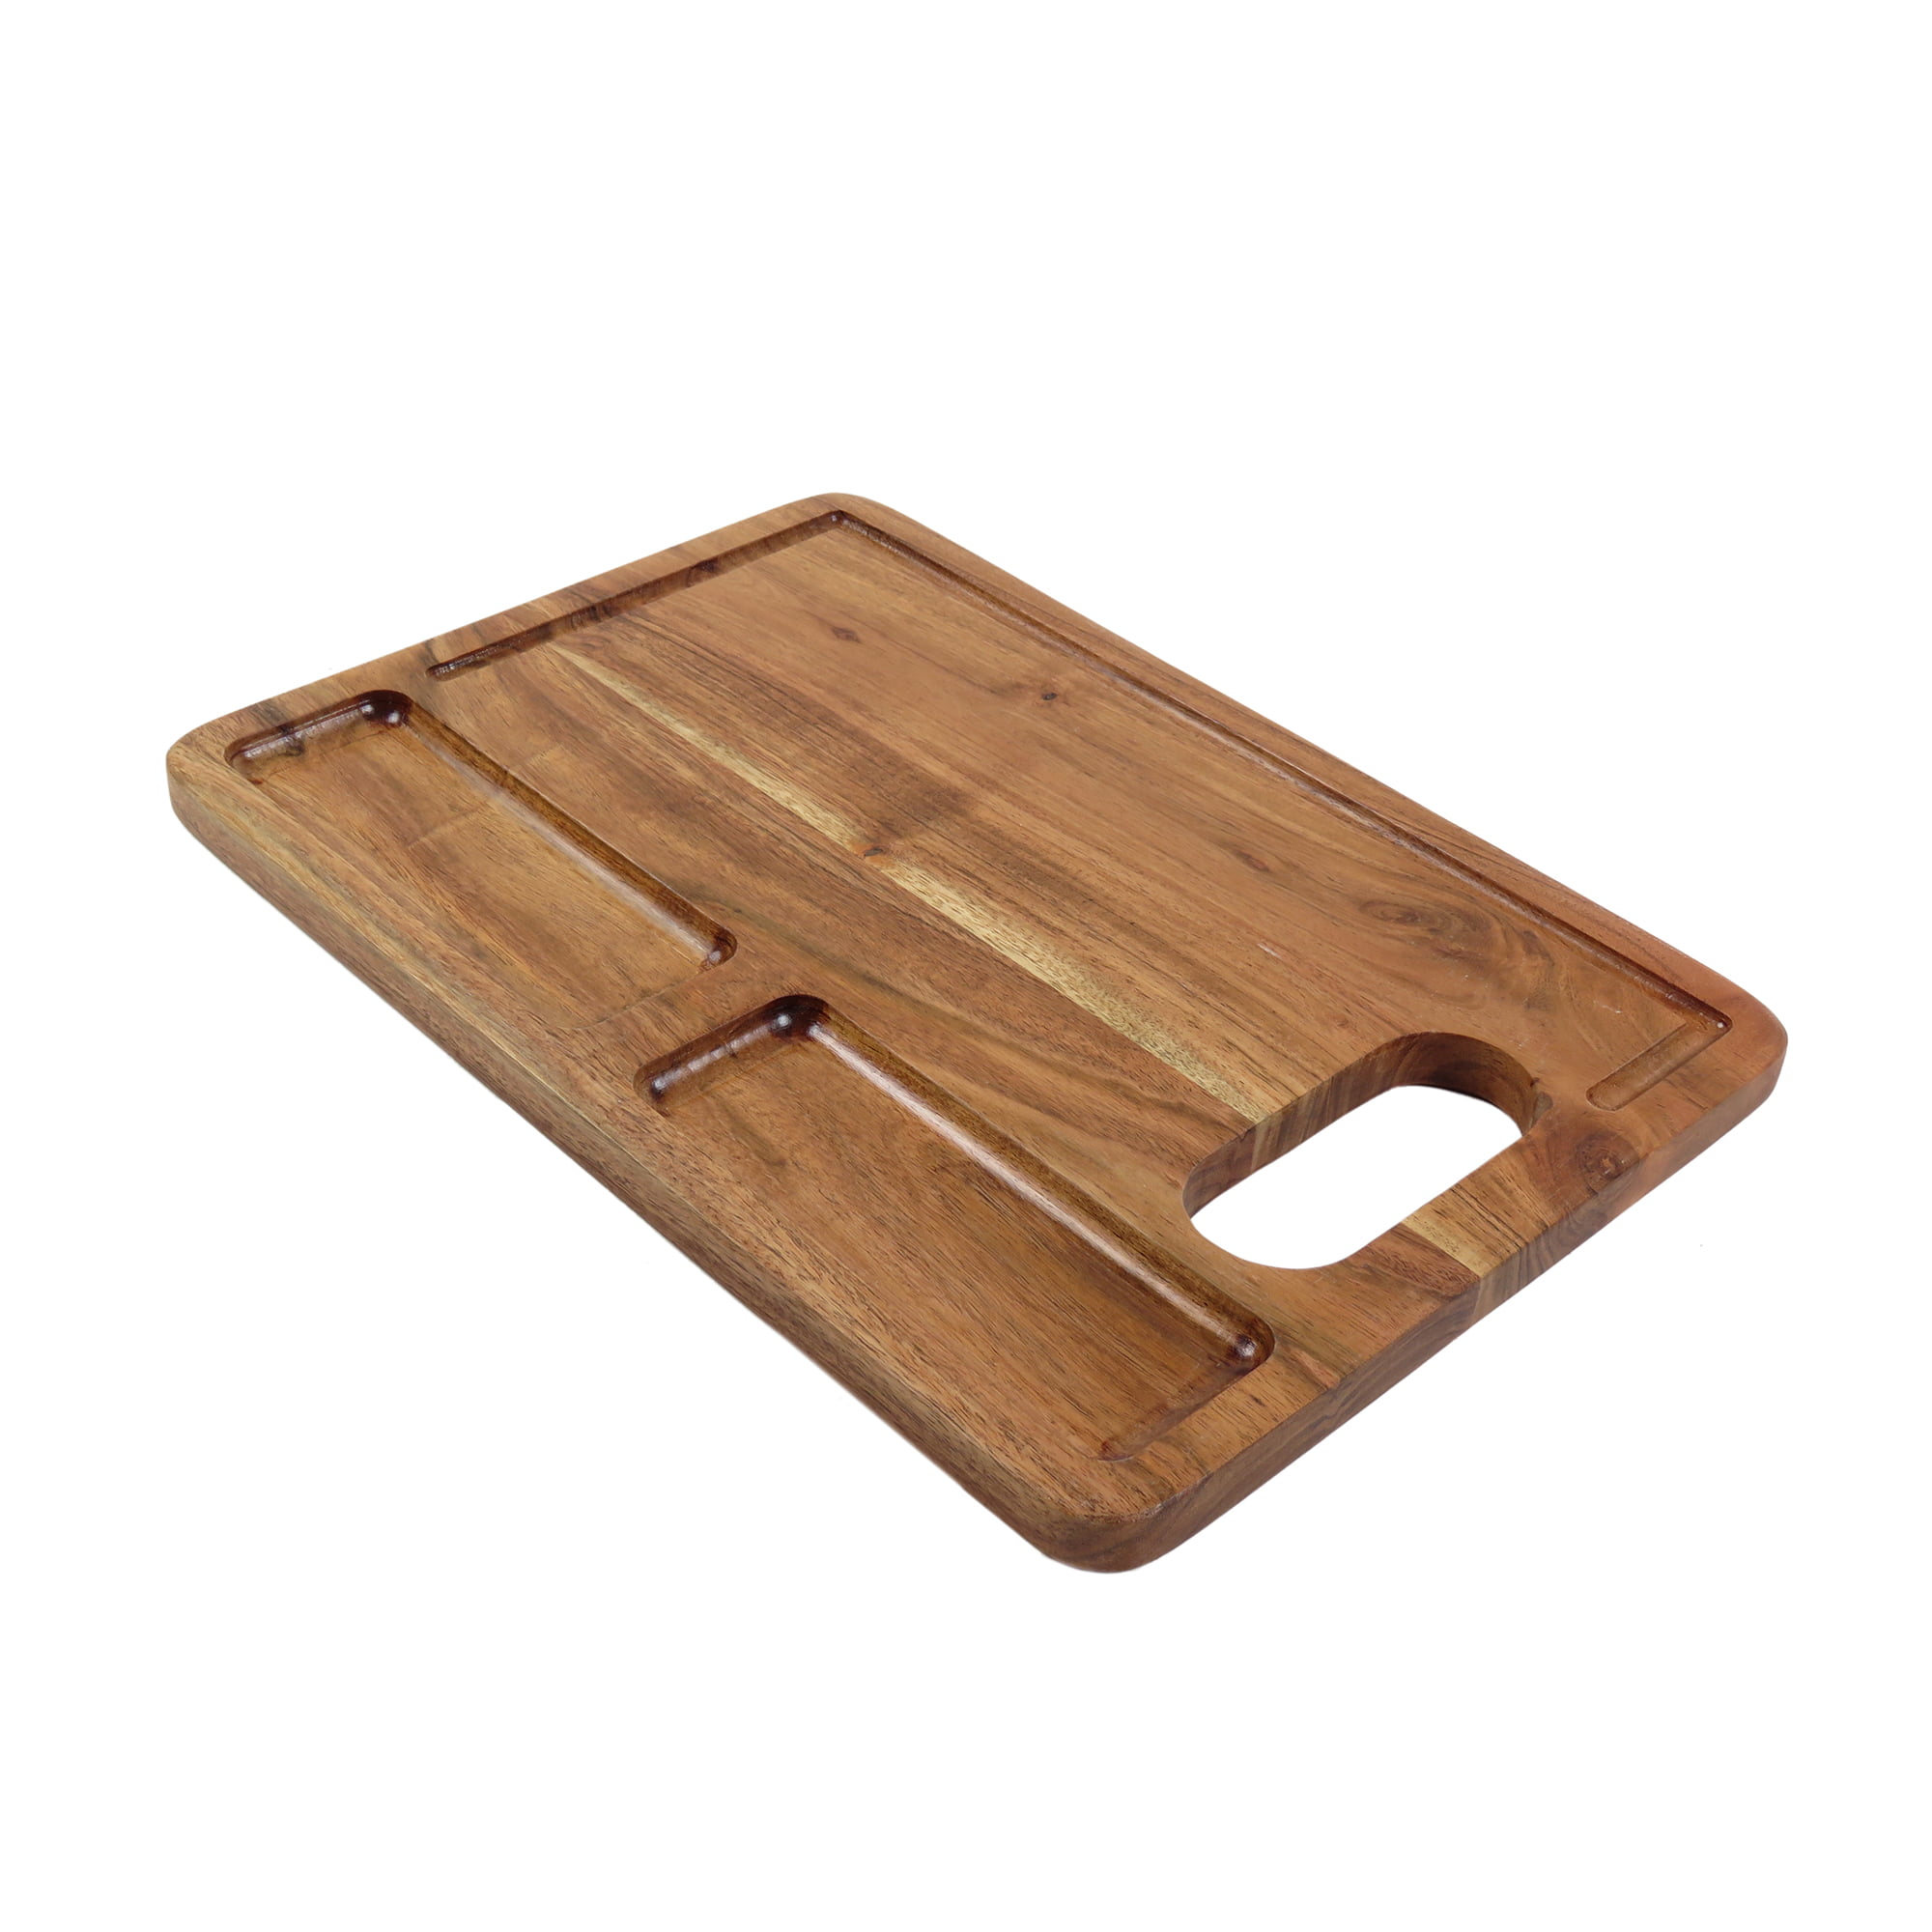 Handmade Fish Shaped Wooden Cutting Board with Handle